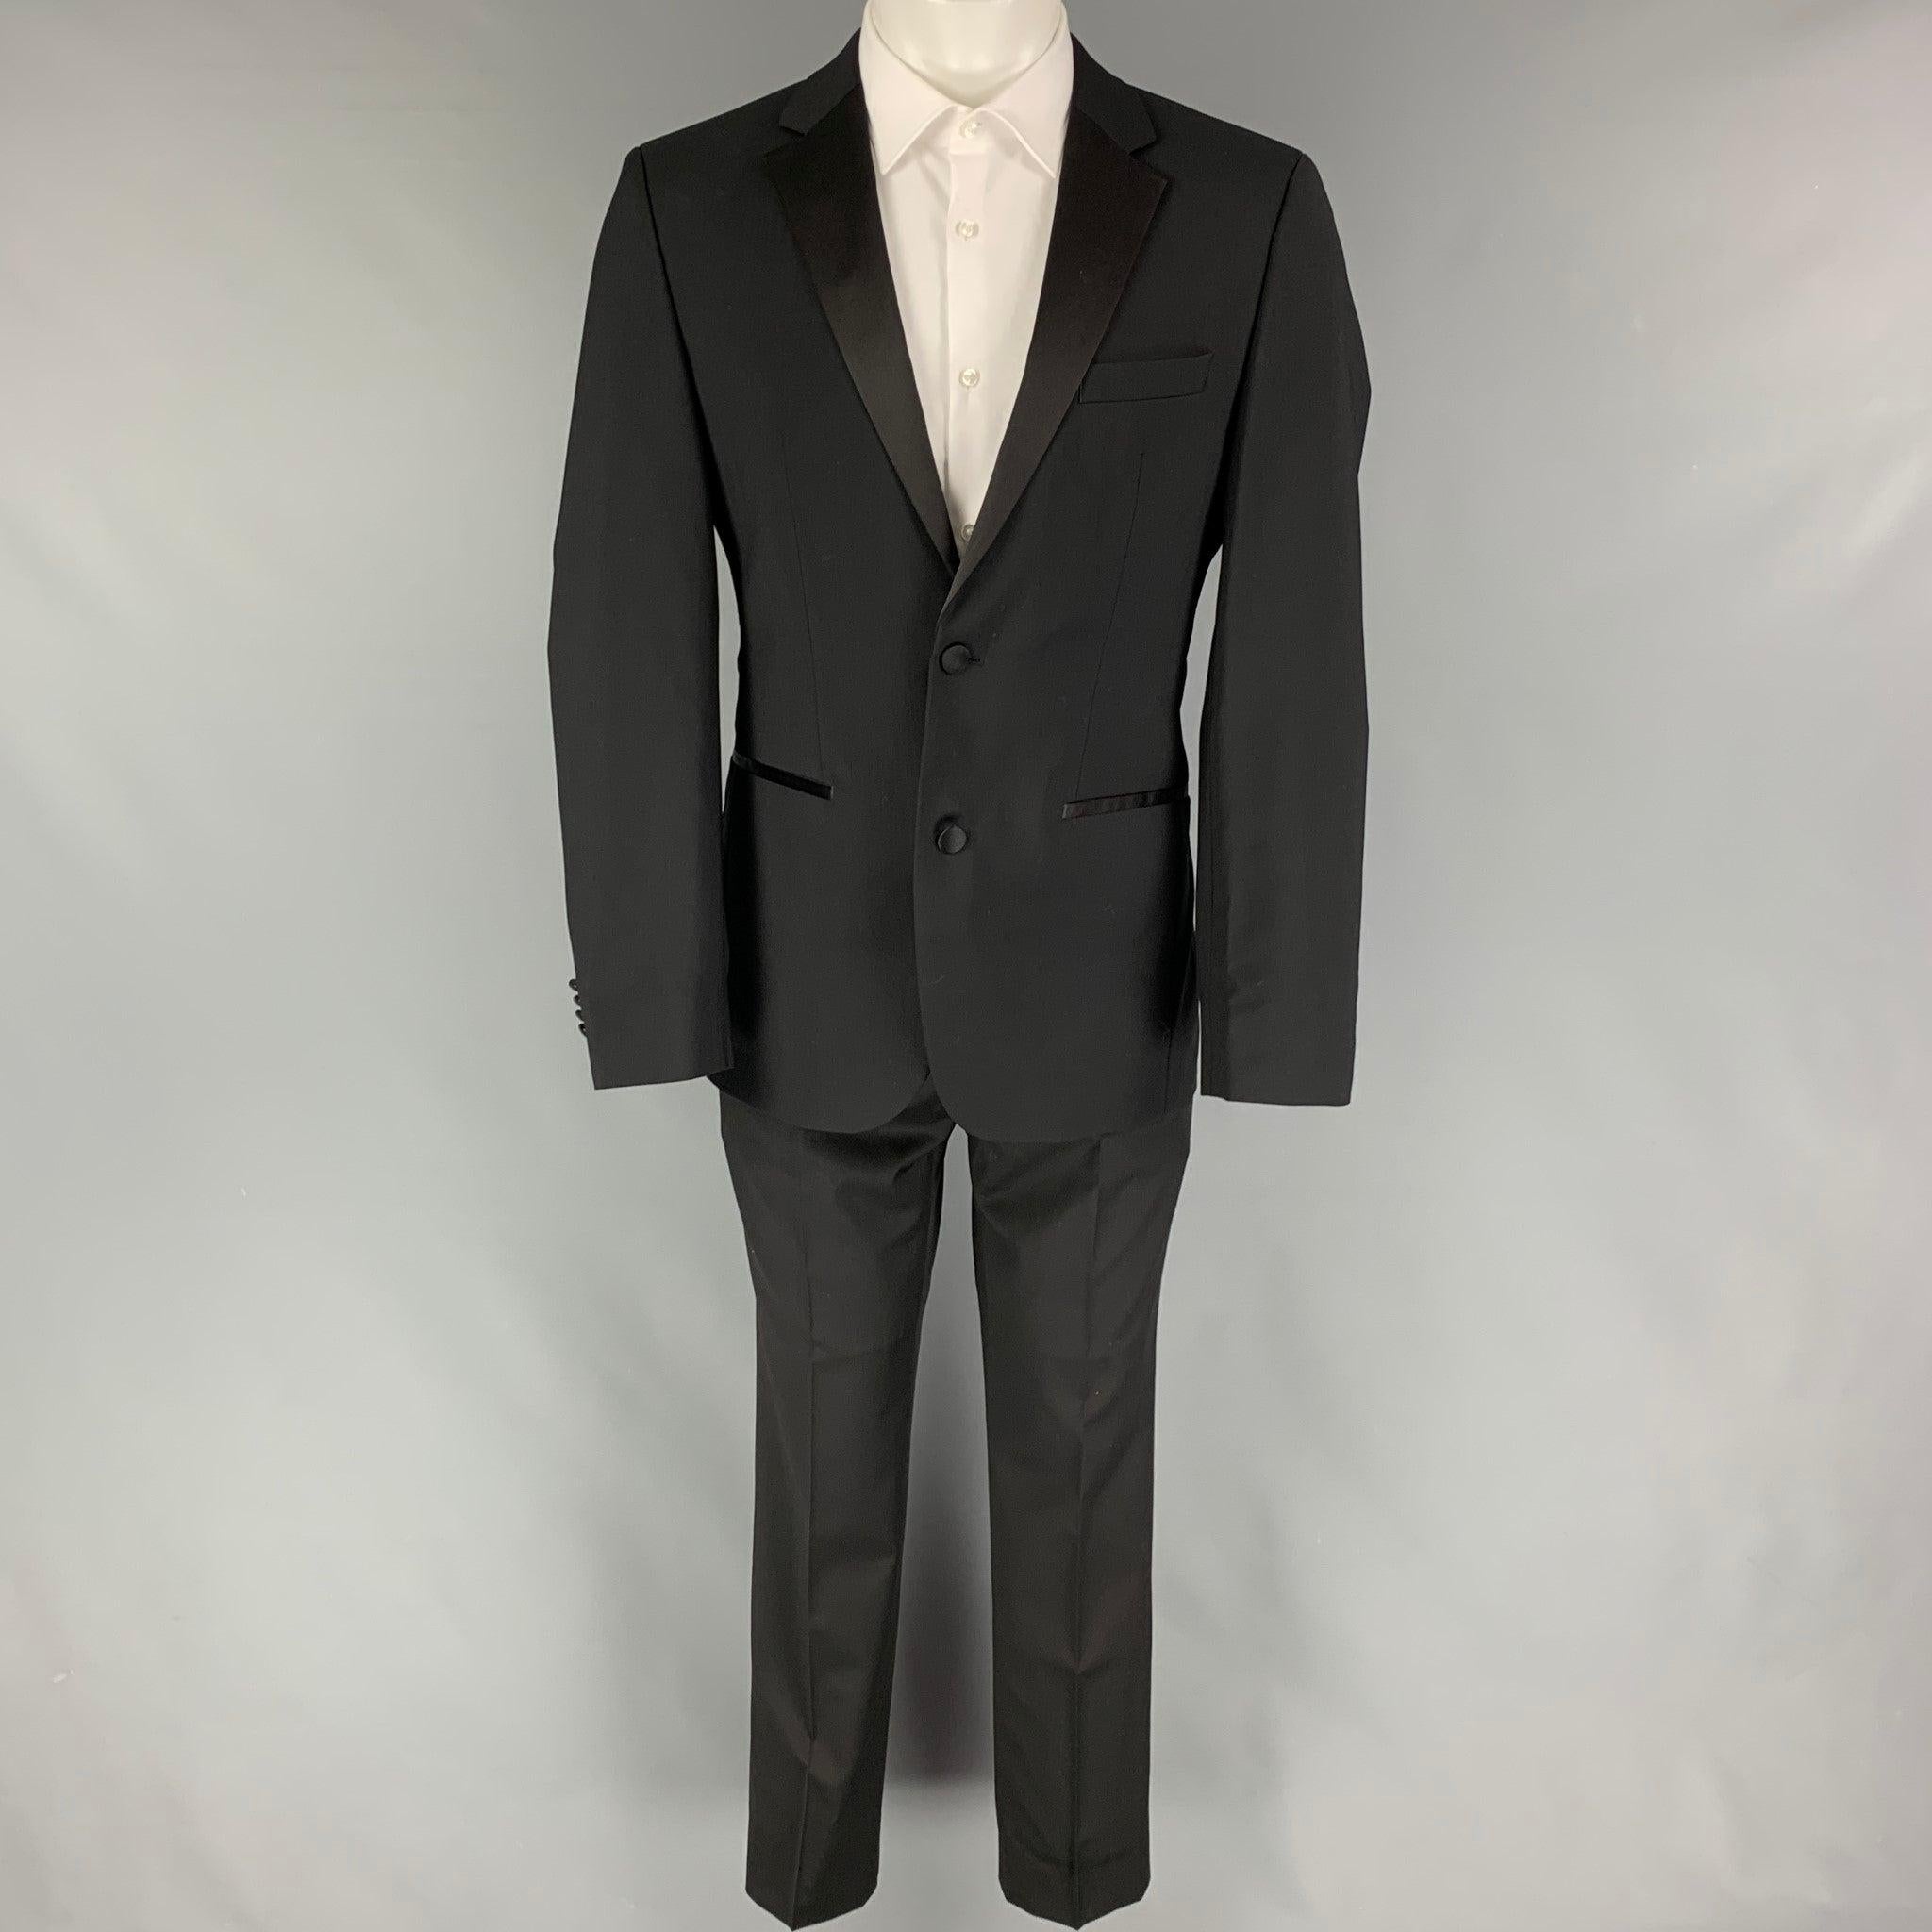 CALVIN KLEIN COLLECTION suit comes in a black wool with a full liner and includes a single breasted, single button sport coat with a notch lapel and matching flat front trousers. Very Good Pre-Owned Condition. 

Marked:   46/36 

Measurements: 
 